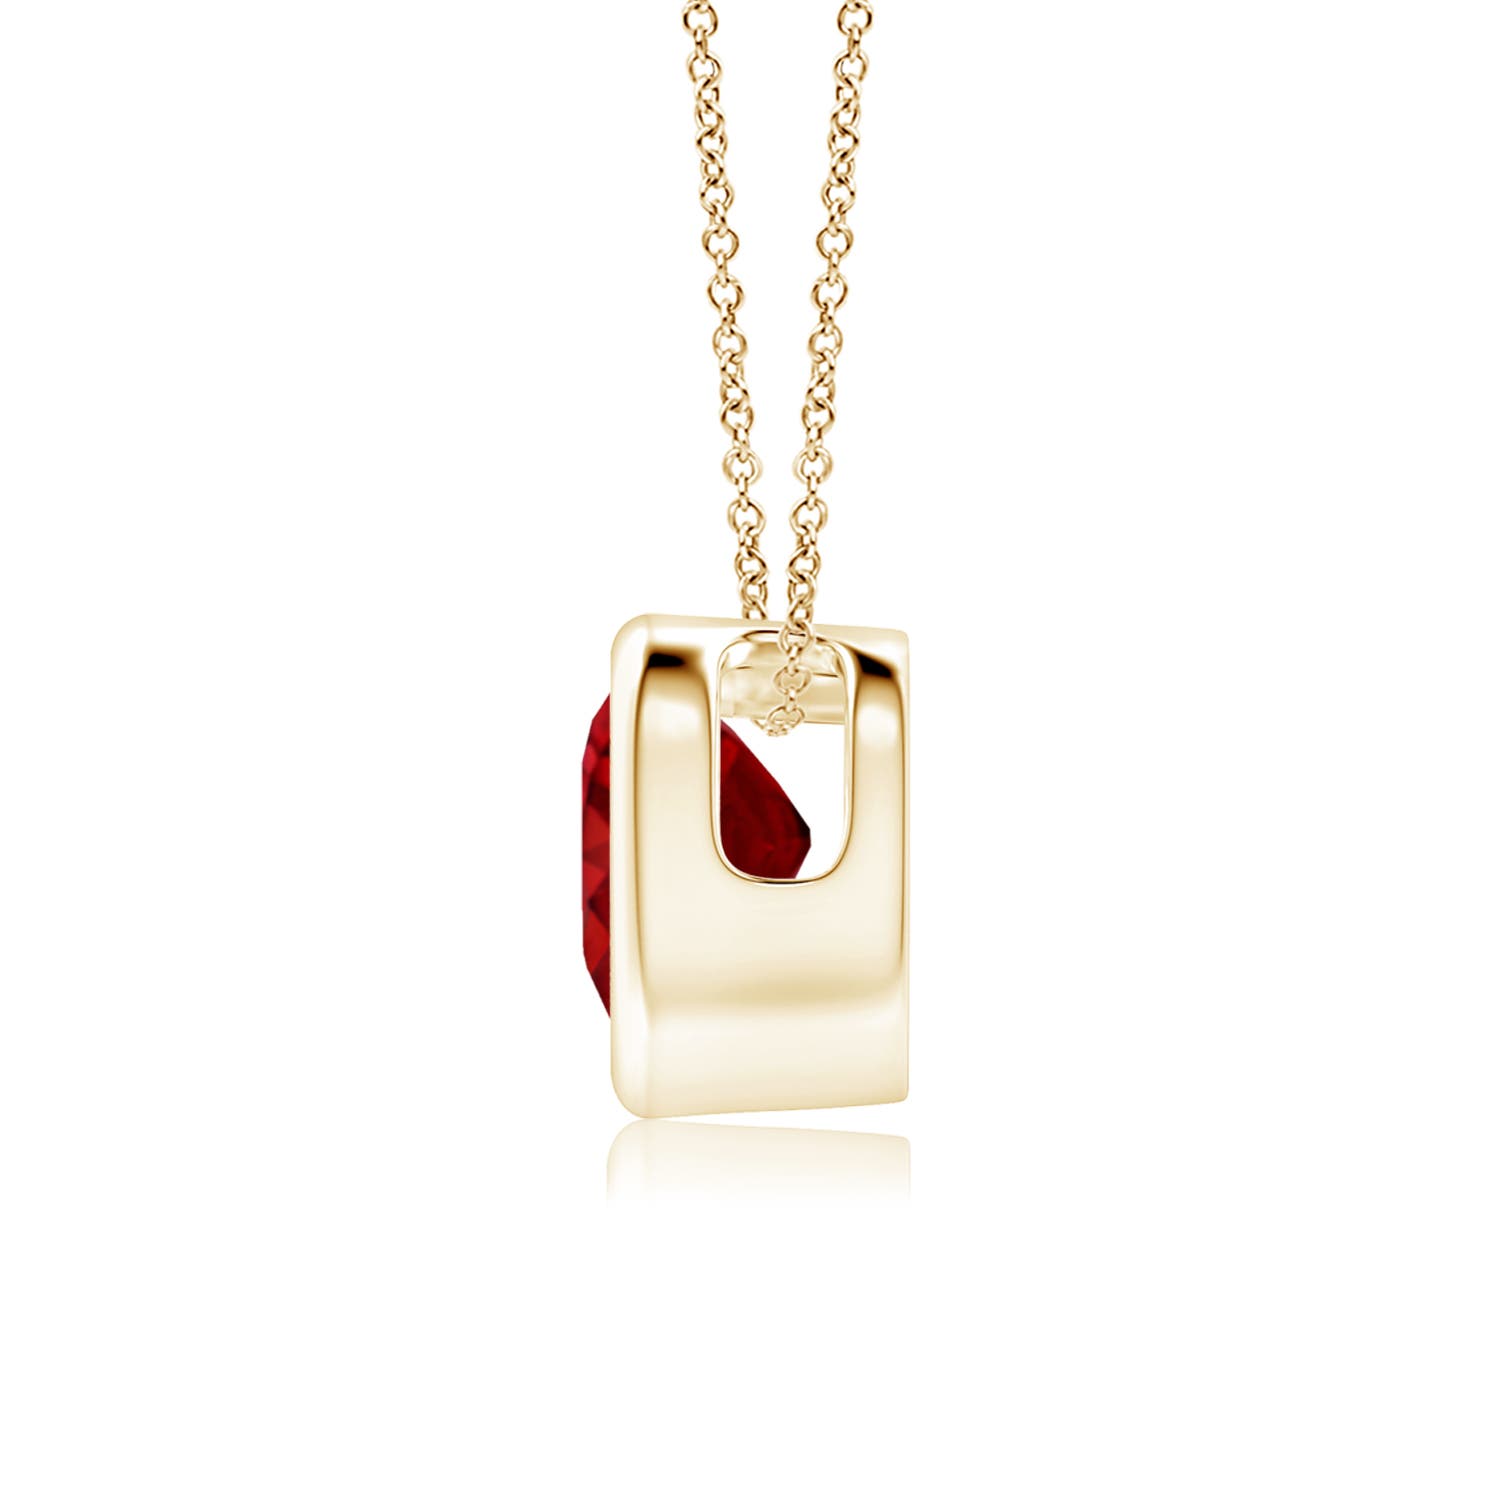 AAAA - Ruby / 0.55 CT / 14 KT Yellow Gold